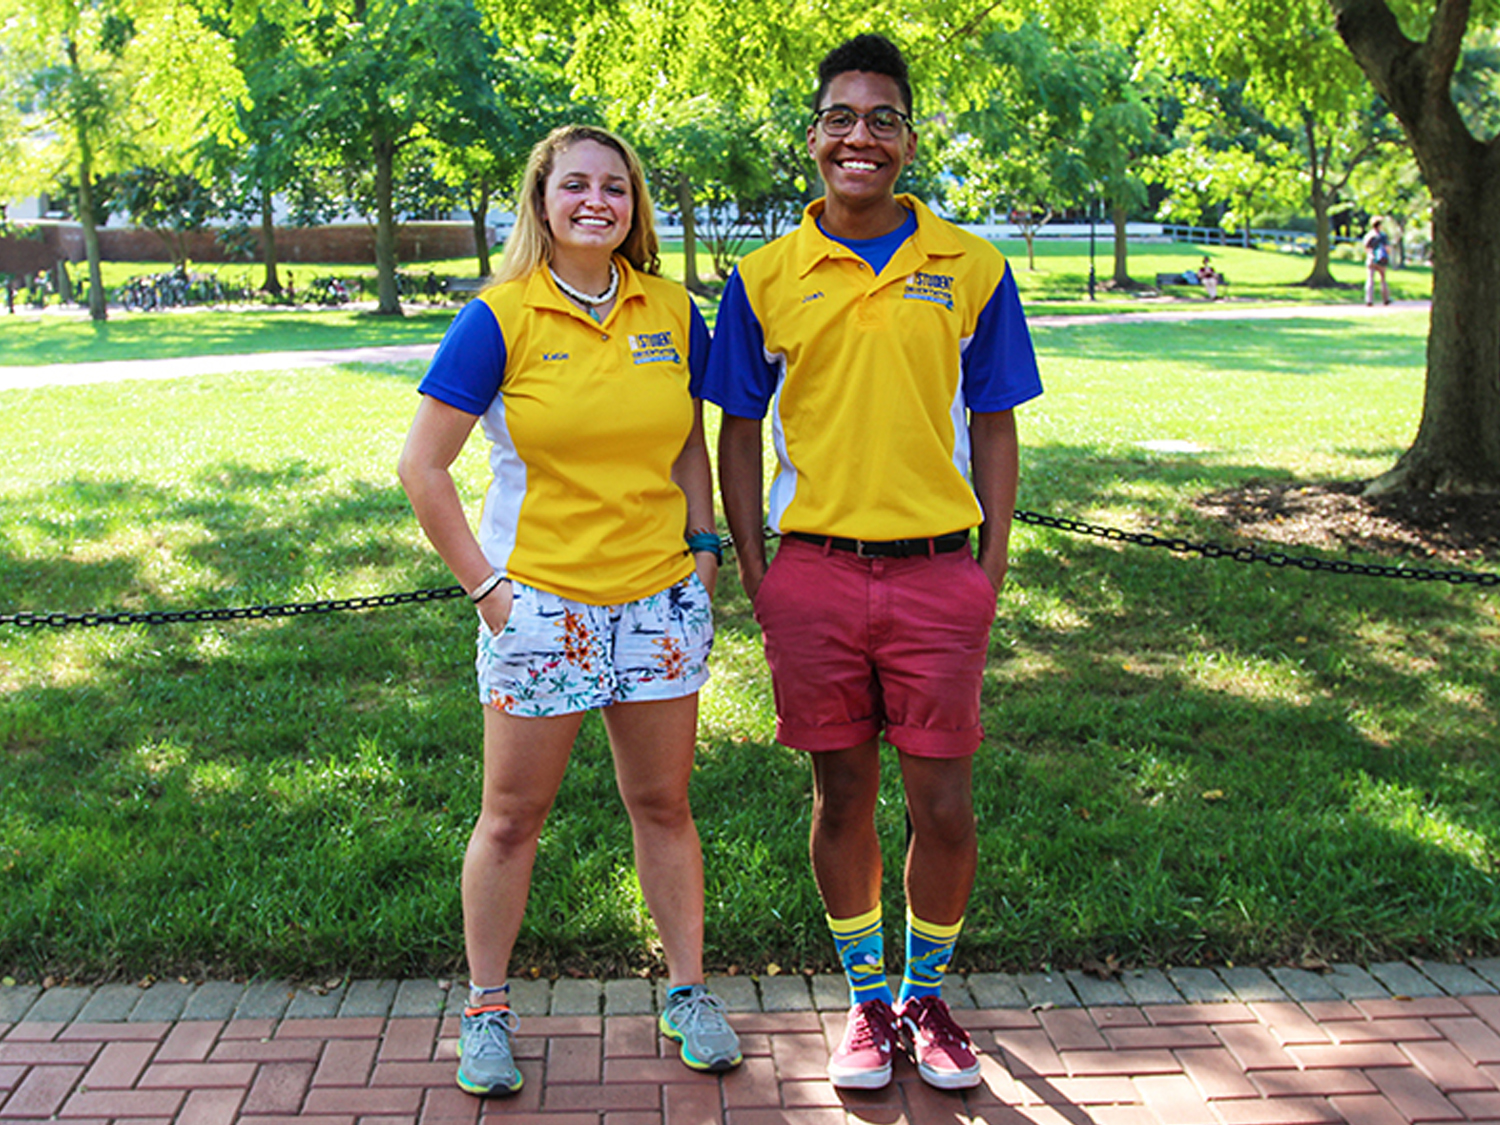 Two CEHD student ambassadors pose on the Unversity green.